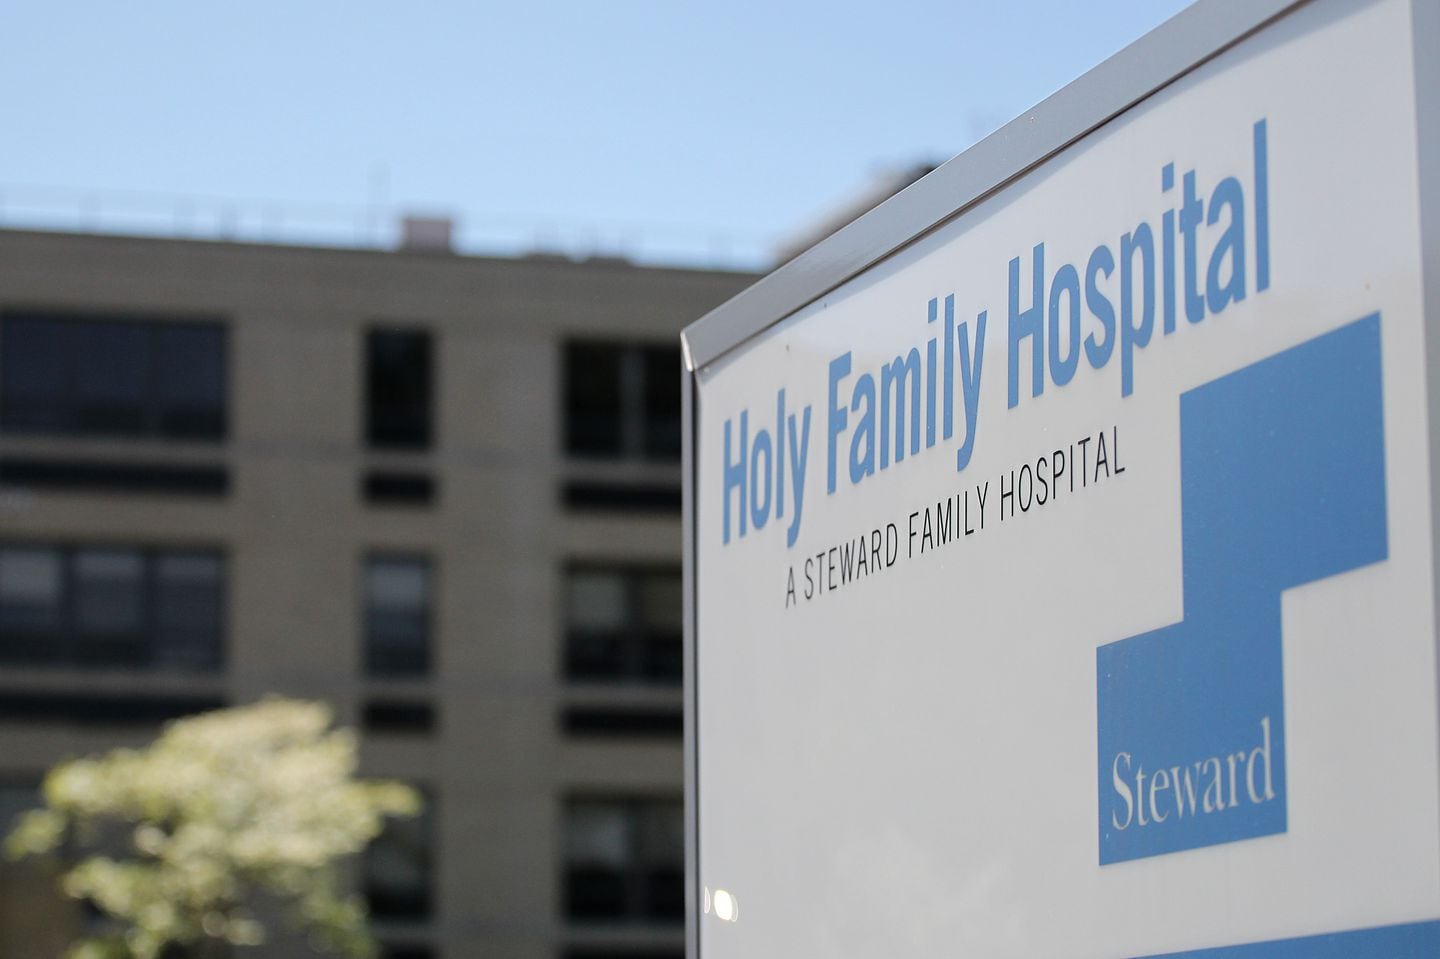 Holy Family Hospital in Methuen is one of several Massachusetts hospitals owned by Steward Health Care.